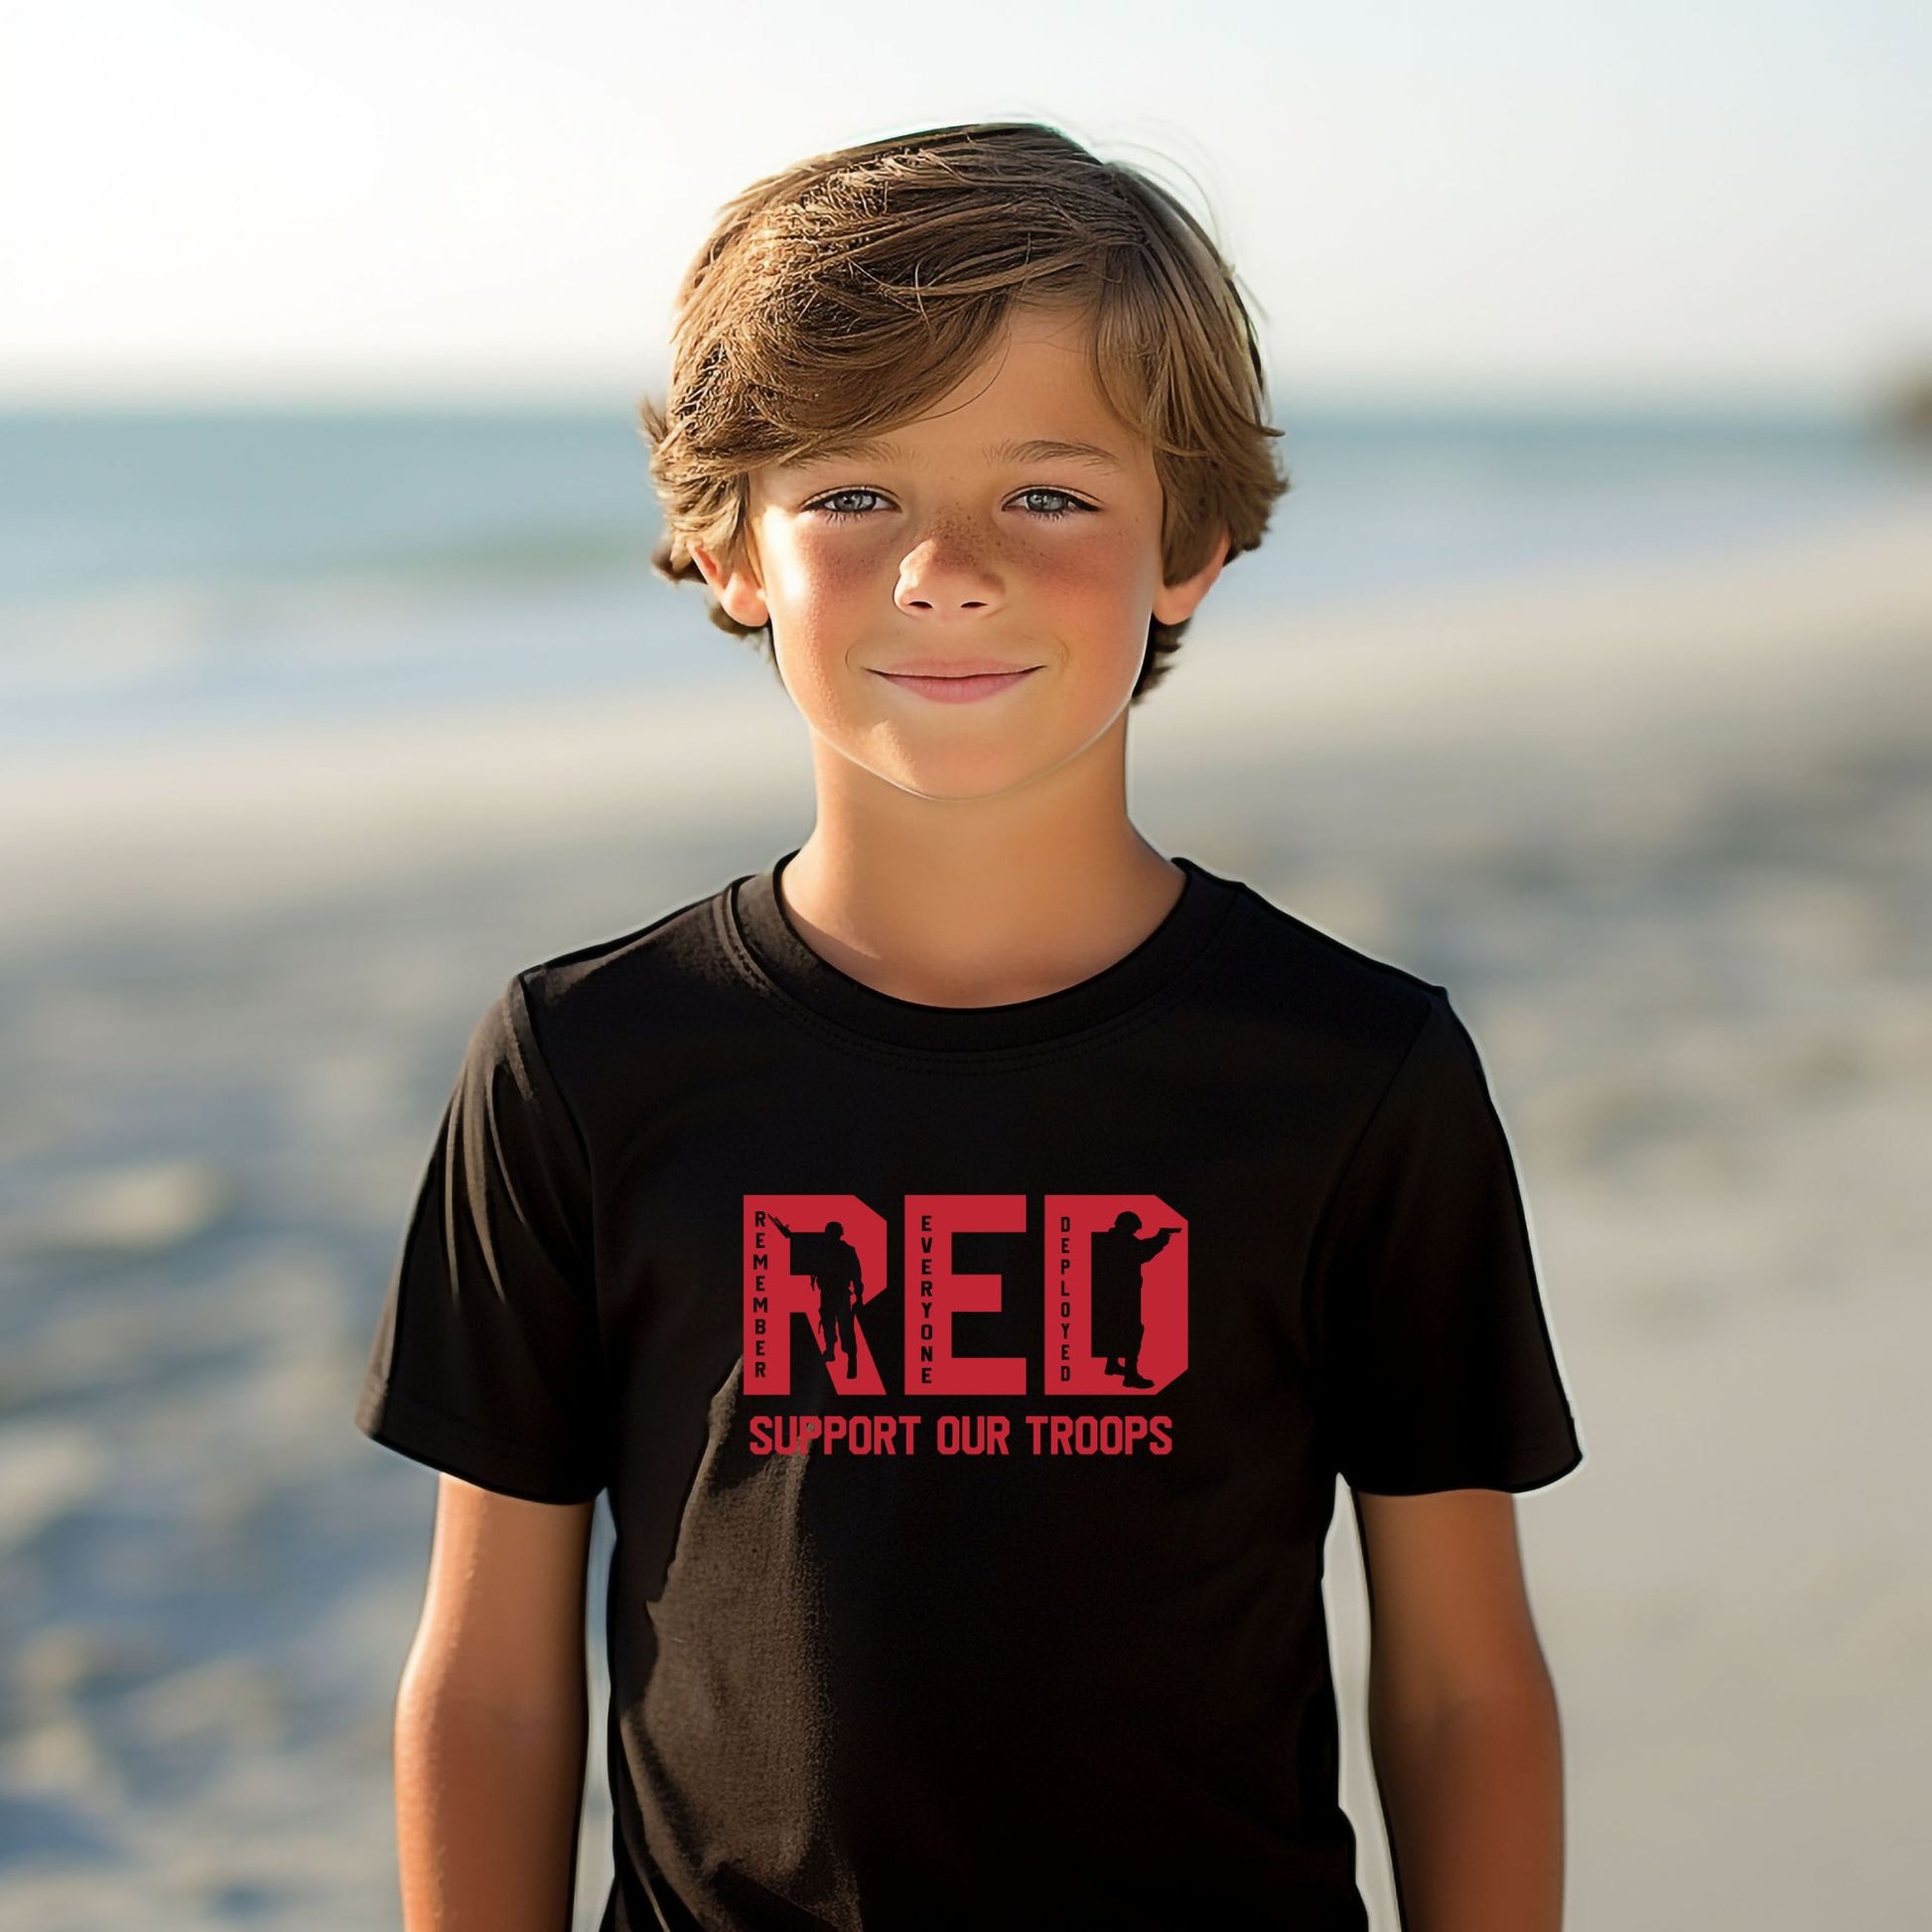 Rakkgear Youth "Remember Everyone Deployed" Black Tee: Black t-shirt featuring RED letters with 'Support Our Troops' on the front. Iconic Rakkgear Logo on the upper back.